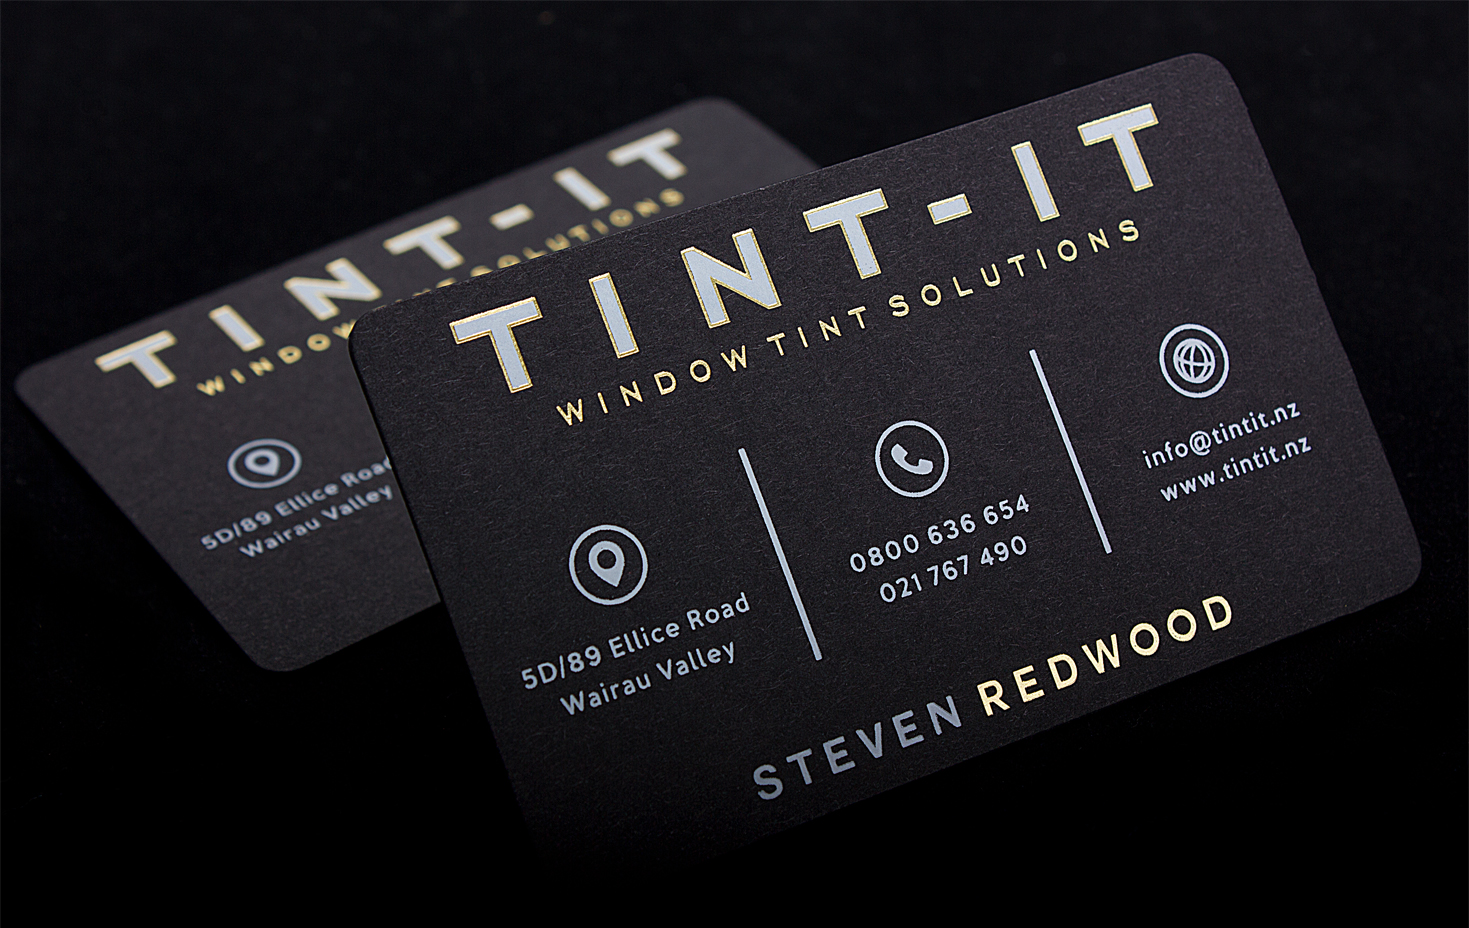 window tint business cards 3